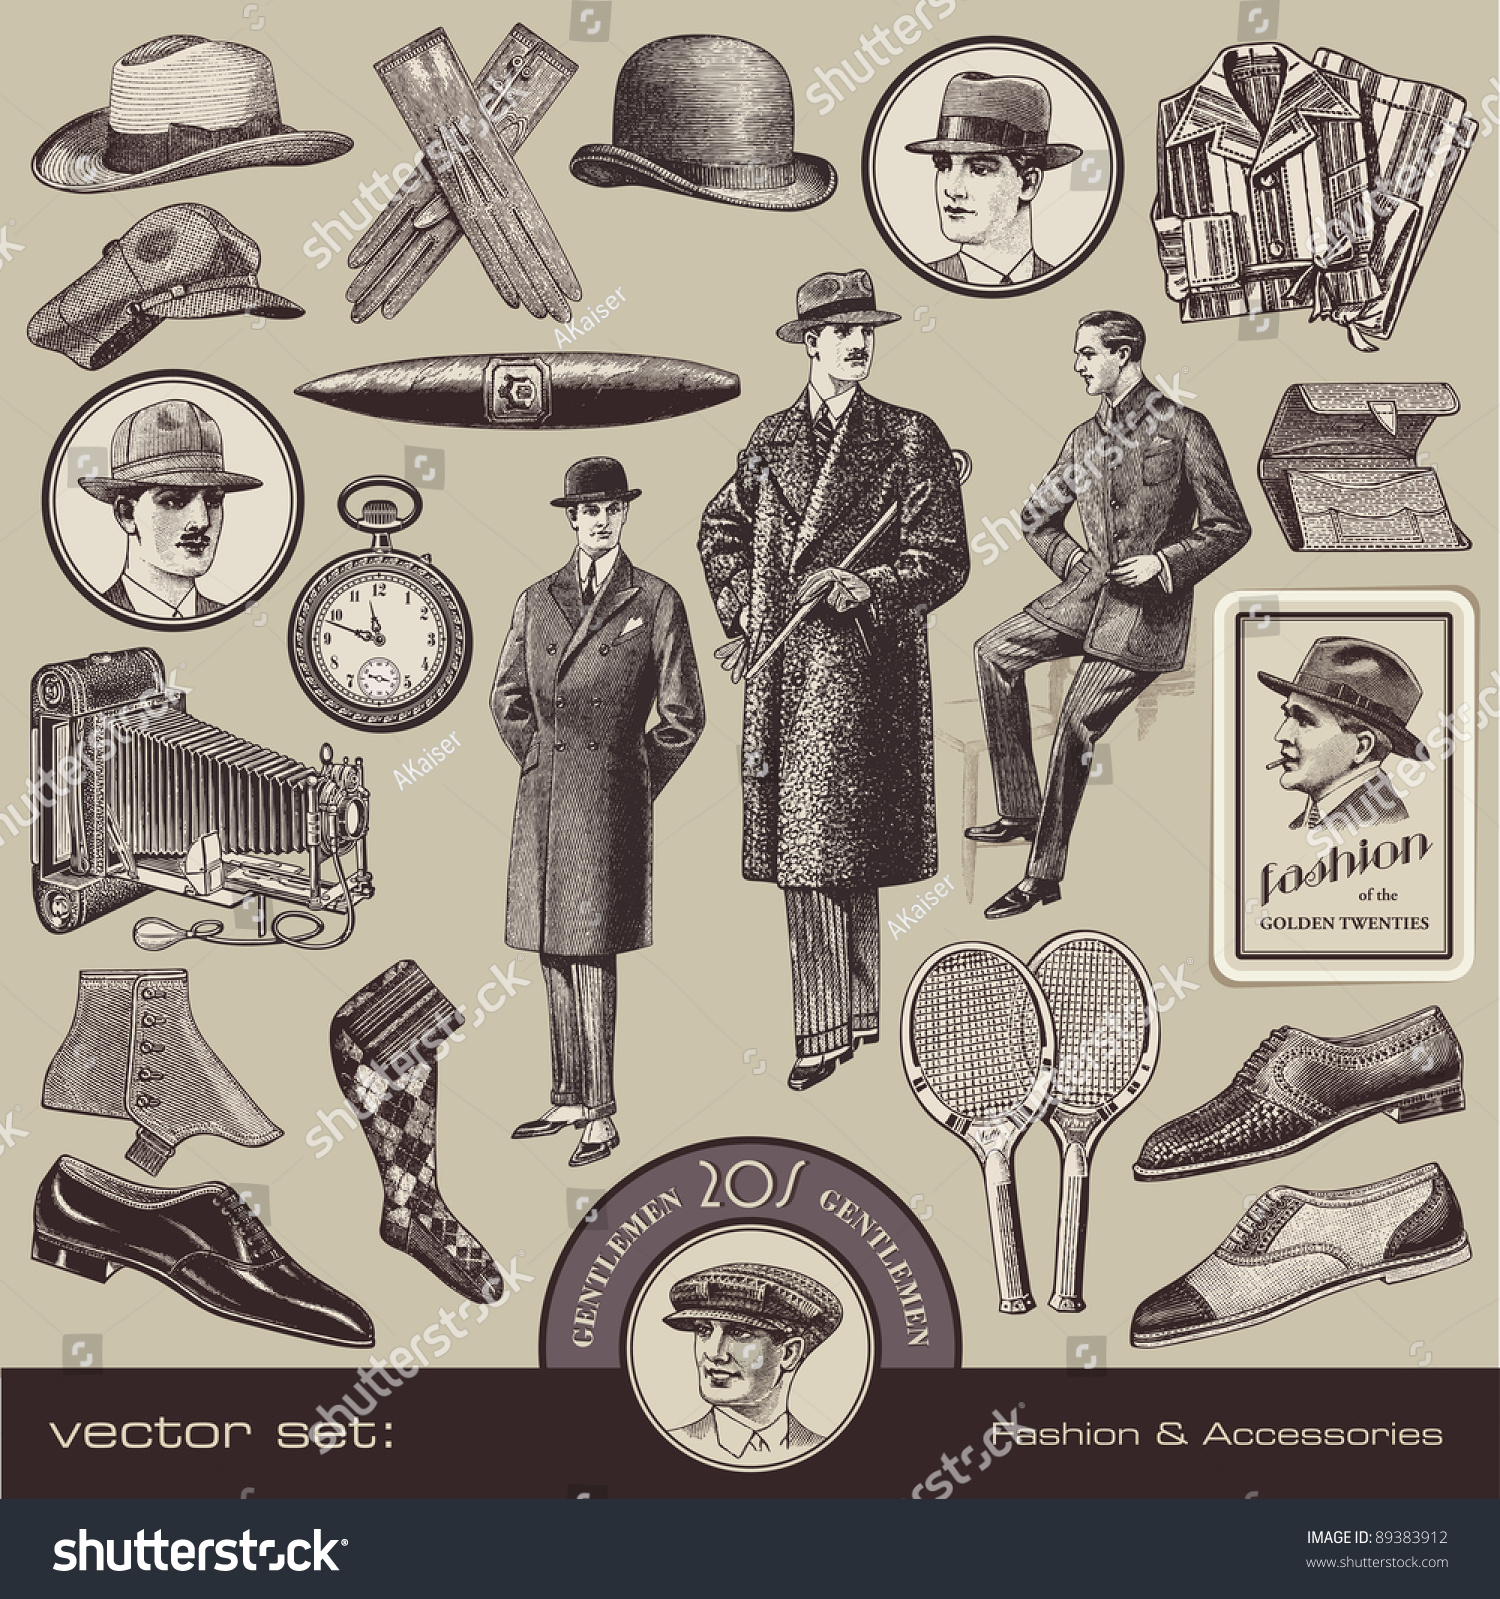 vector set: Gentlemen's fashion and accessories of the 20s #89383912